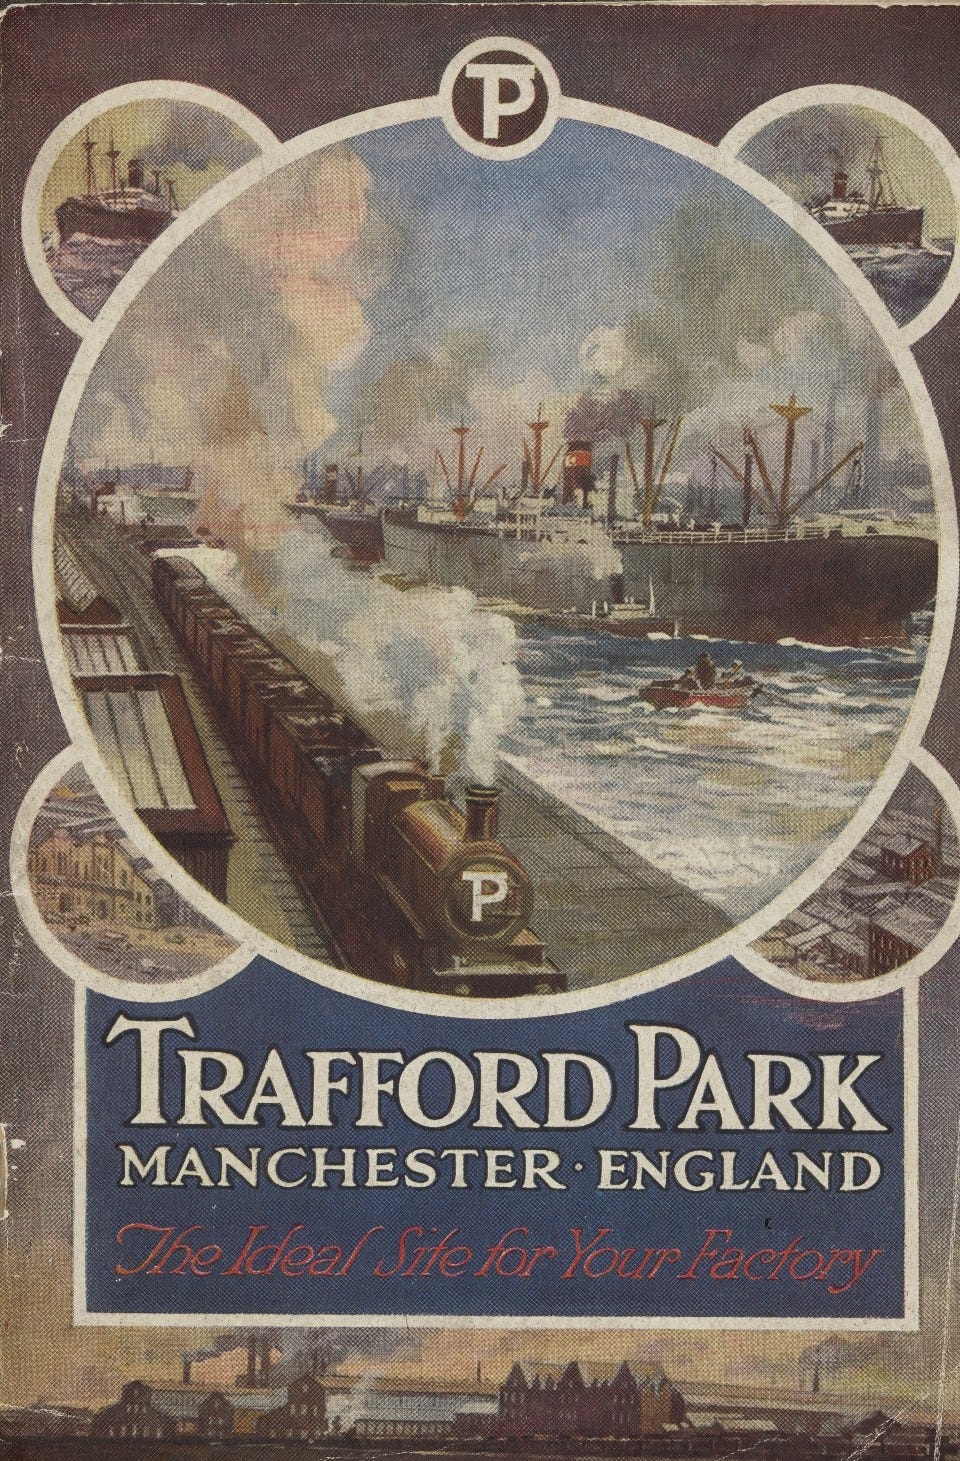 Brochure for Trafford Park Manchester England, claiming to be ‘The ideal site for your factory’, featuring an image of a steam train alongside a shipping canal with large ships.